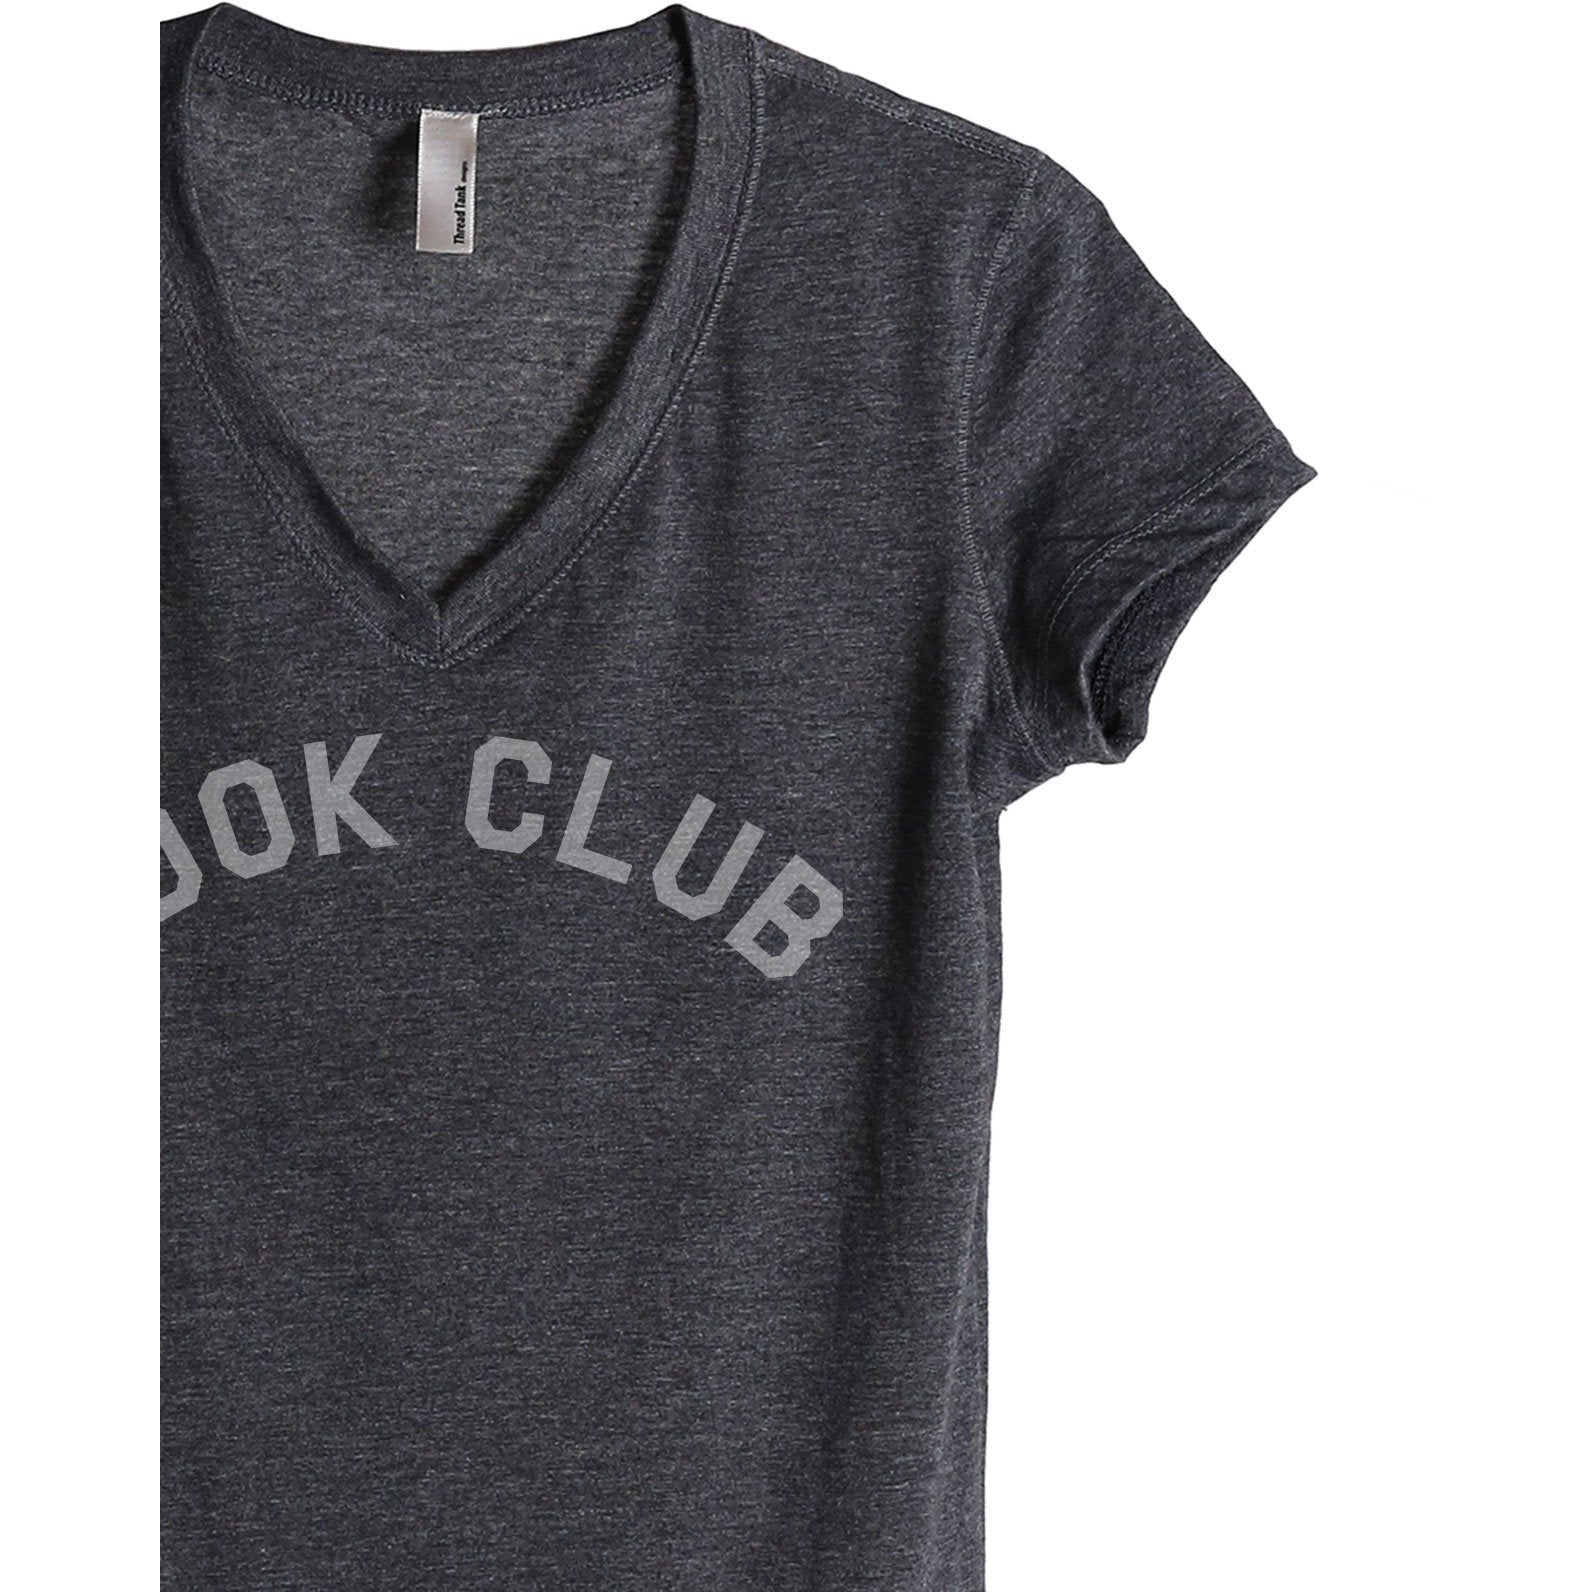 Book Club Women's Relaxed Crewneck T-Shirt Top Tee Charcoal Grey